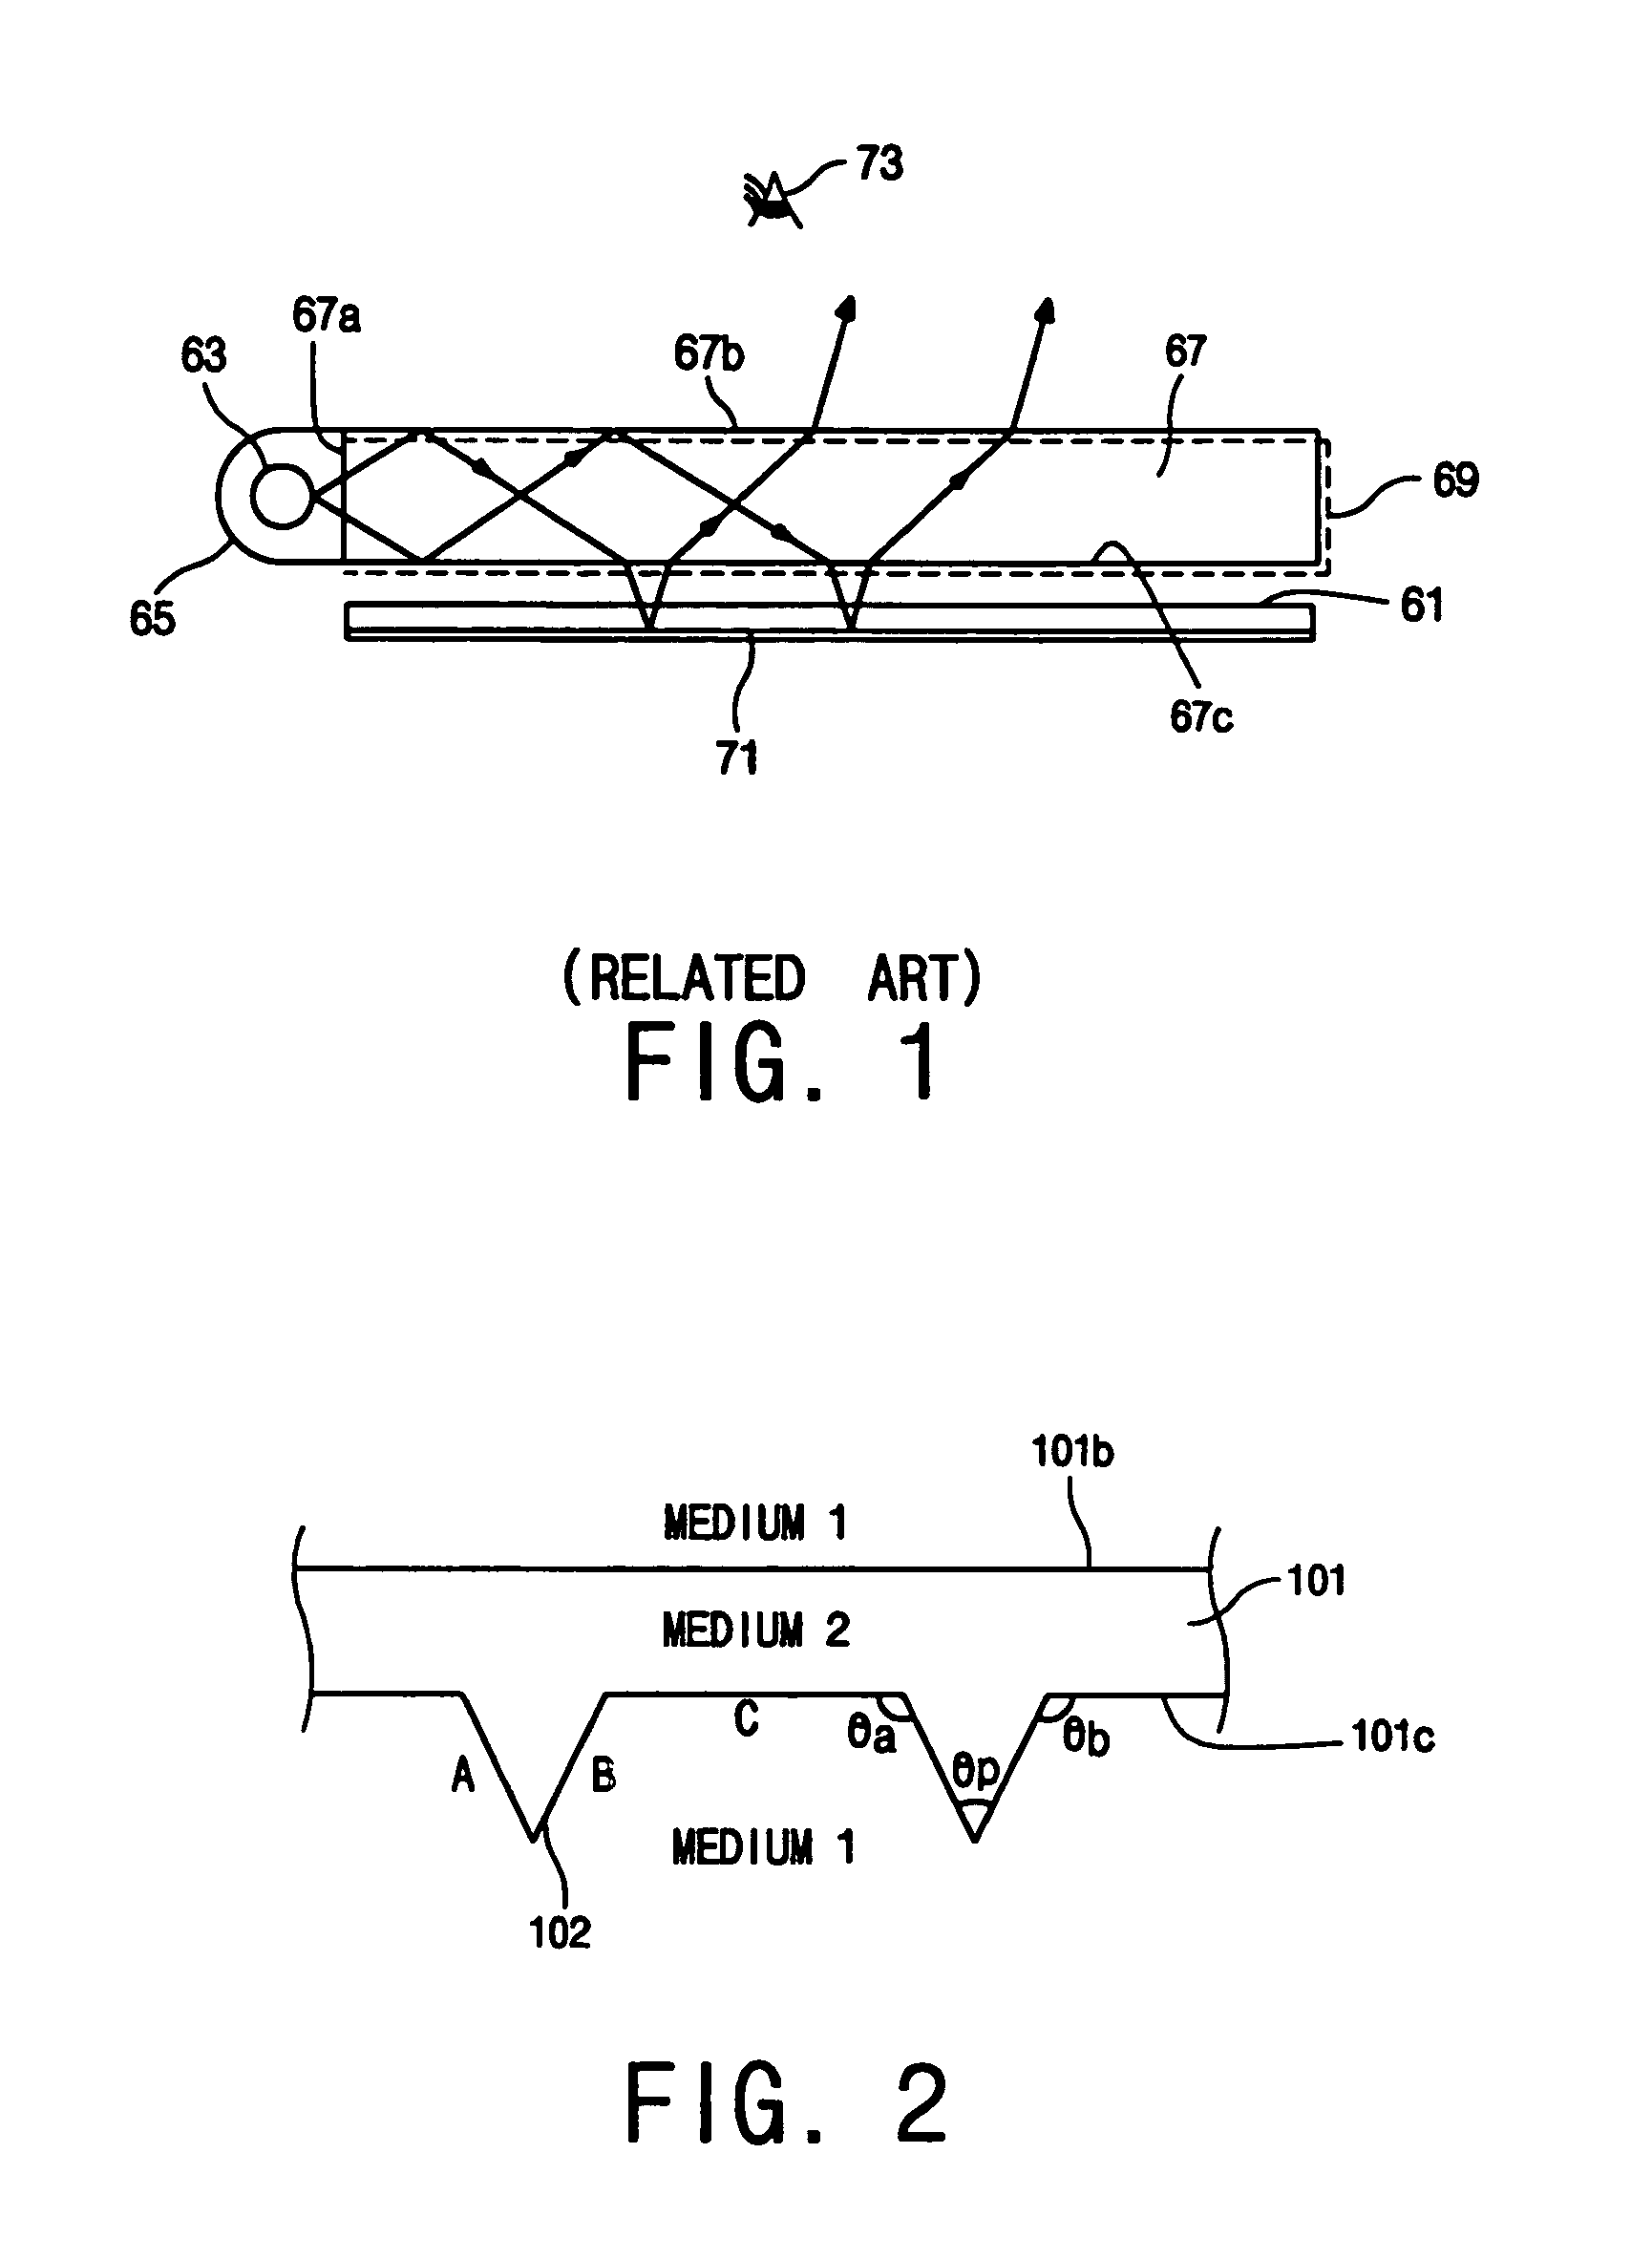 Reflective liquid crystal display device having an auxiliary light source device with a uniform light distribution